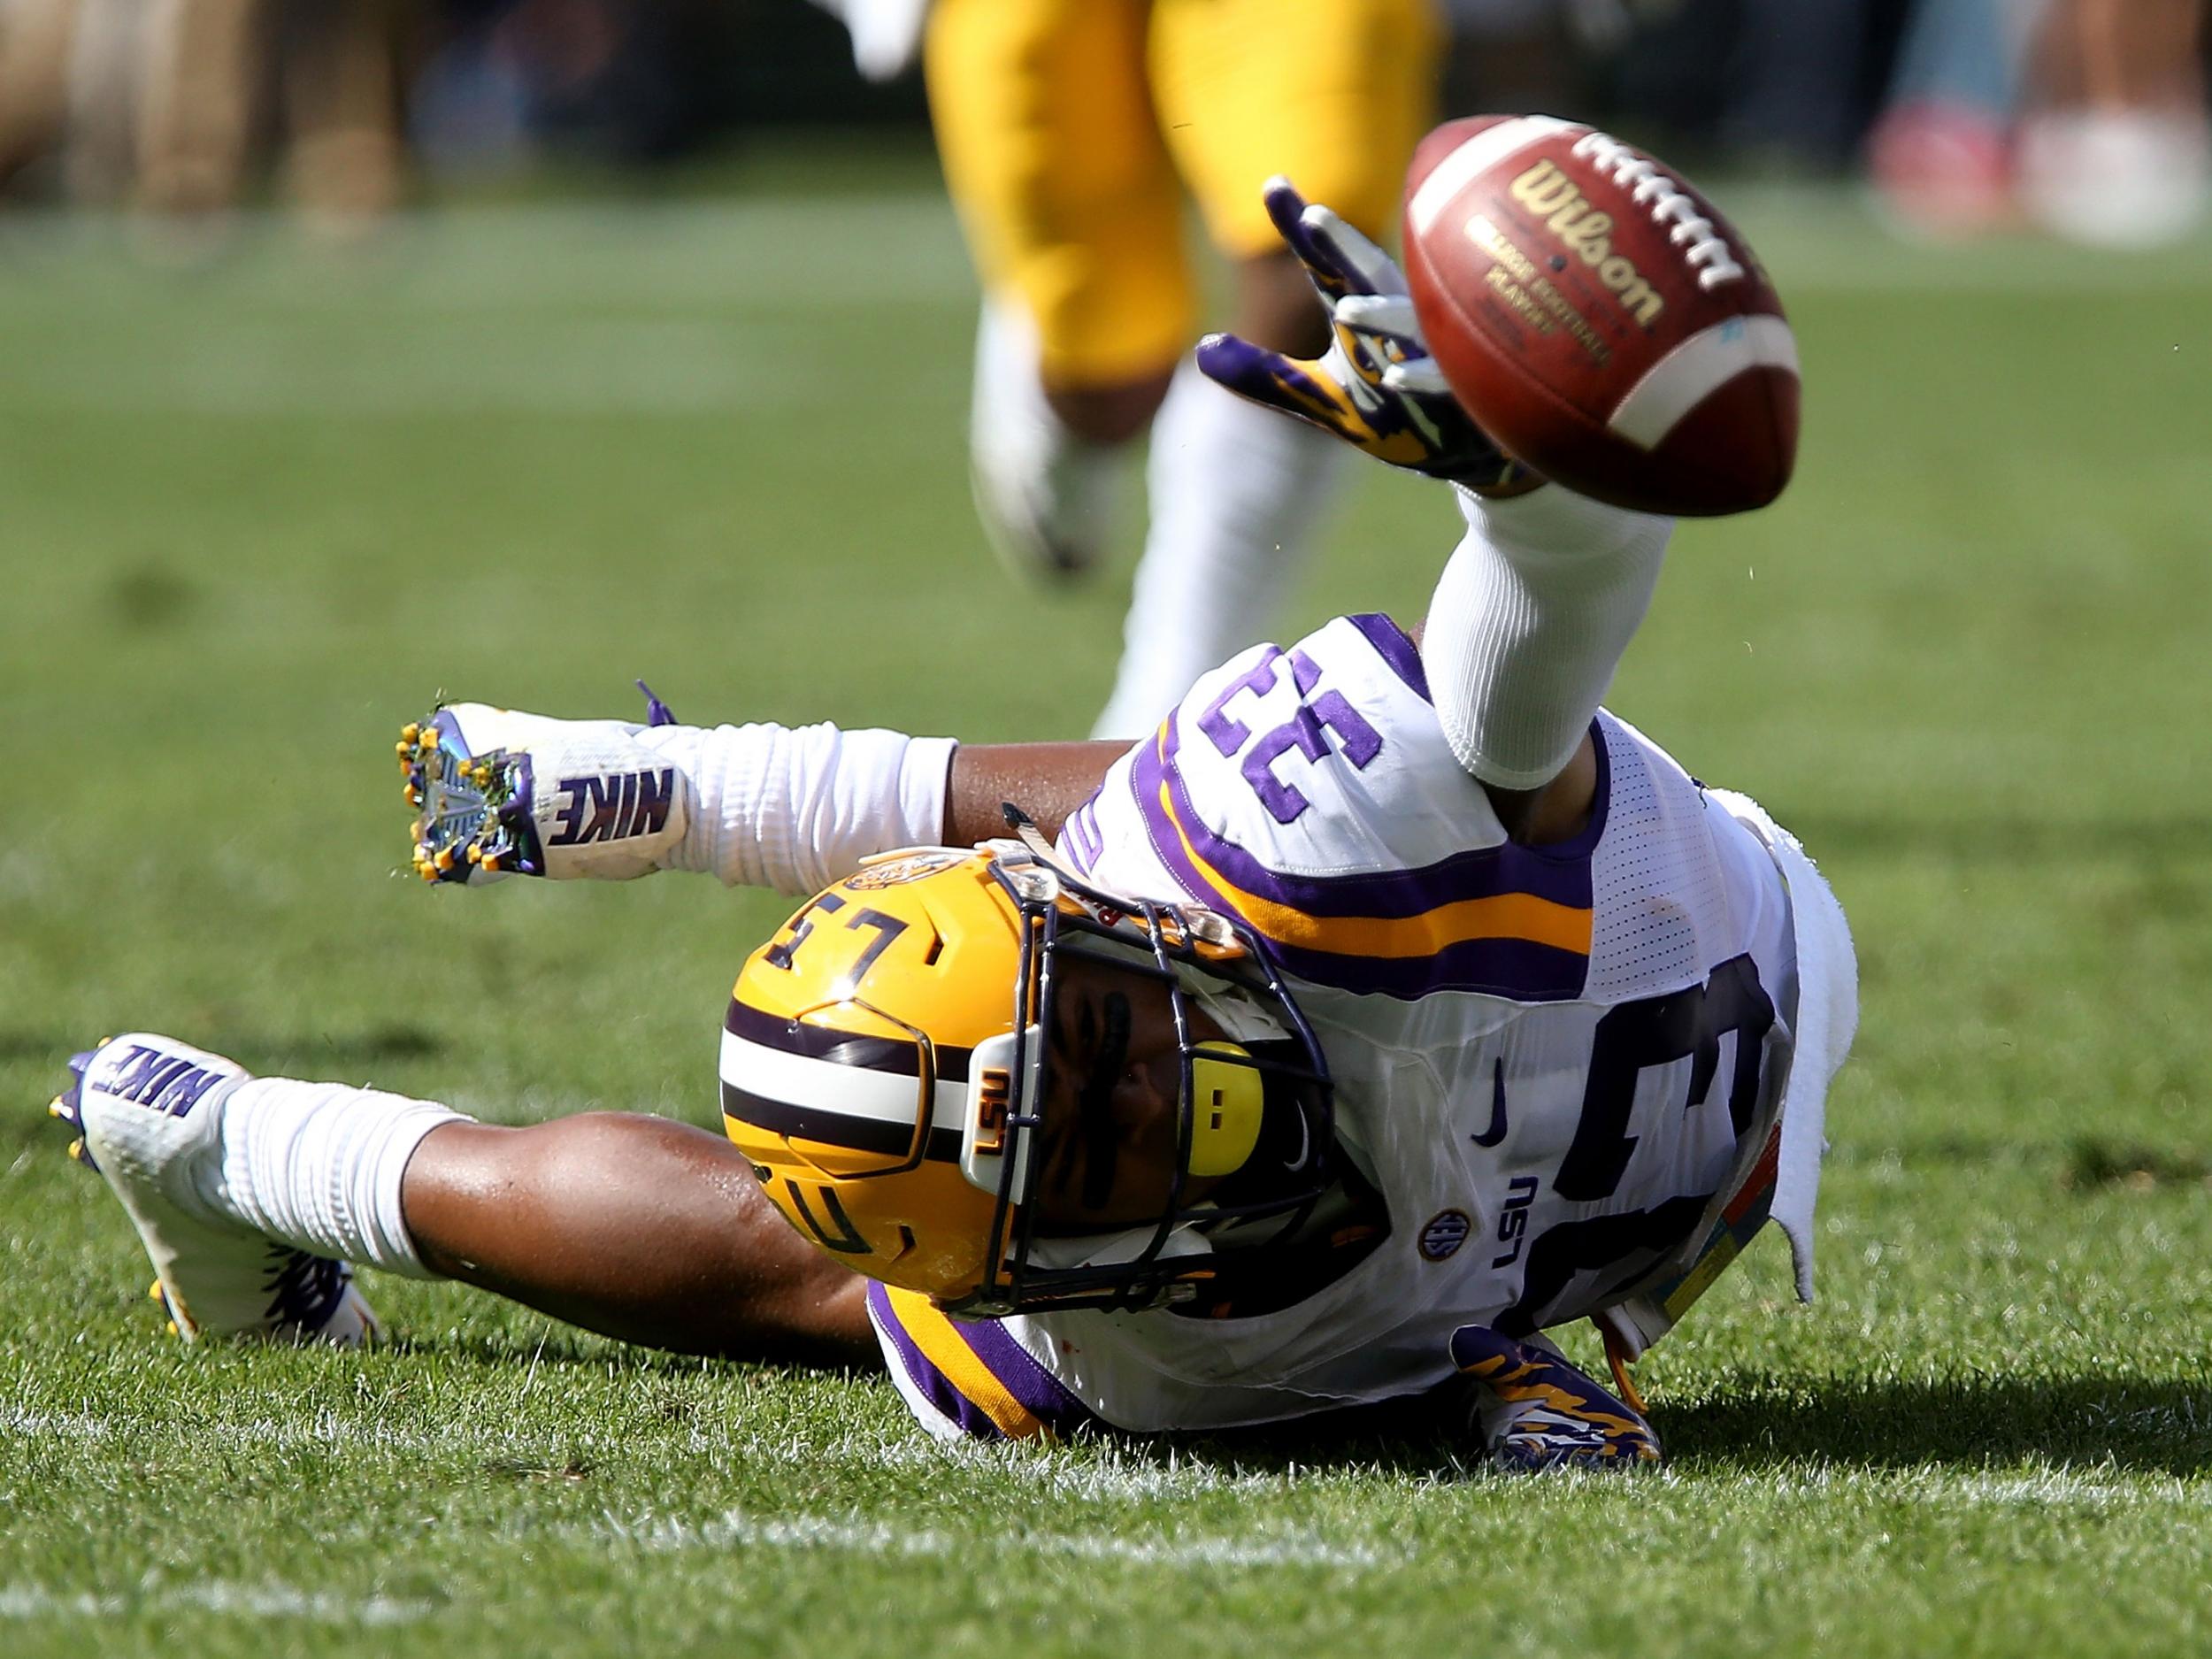 &#13;
LSU safety Jamal Adams will go in the top 10 (Getty)&#13;